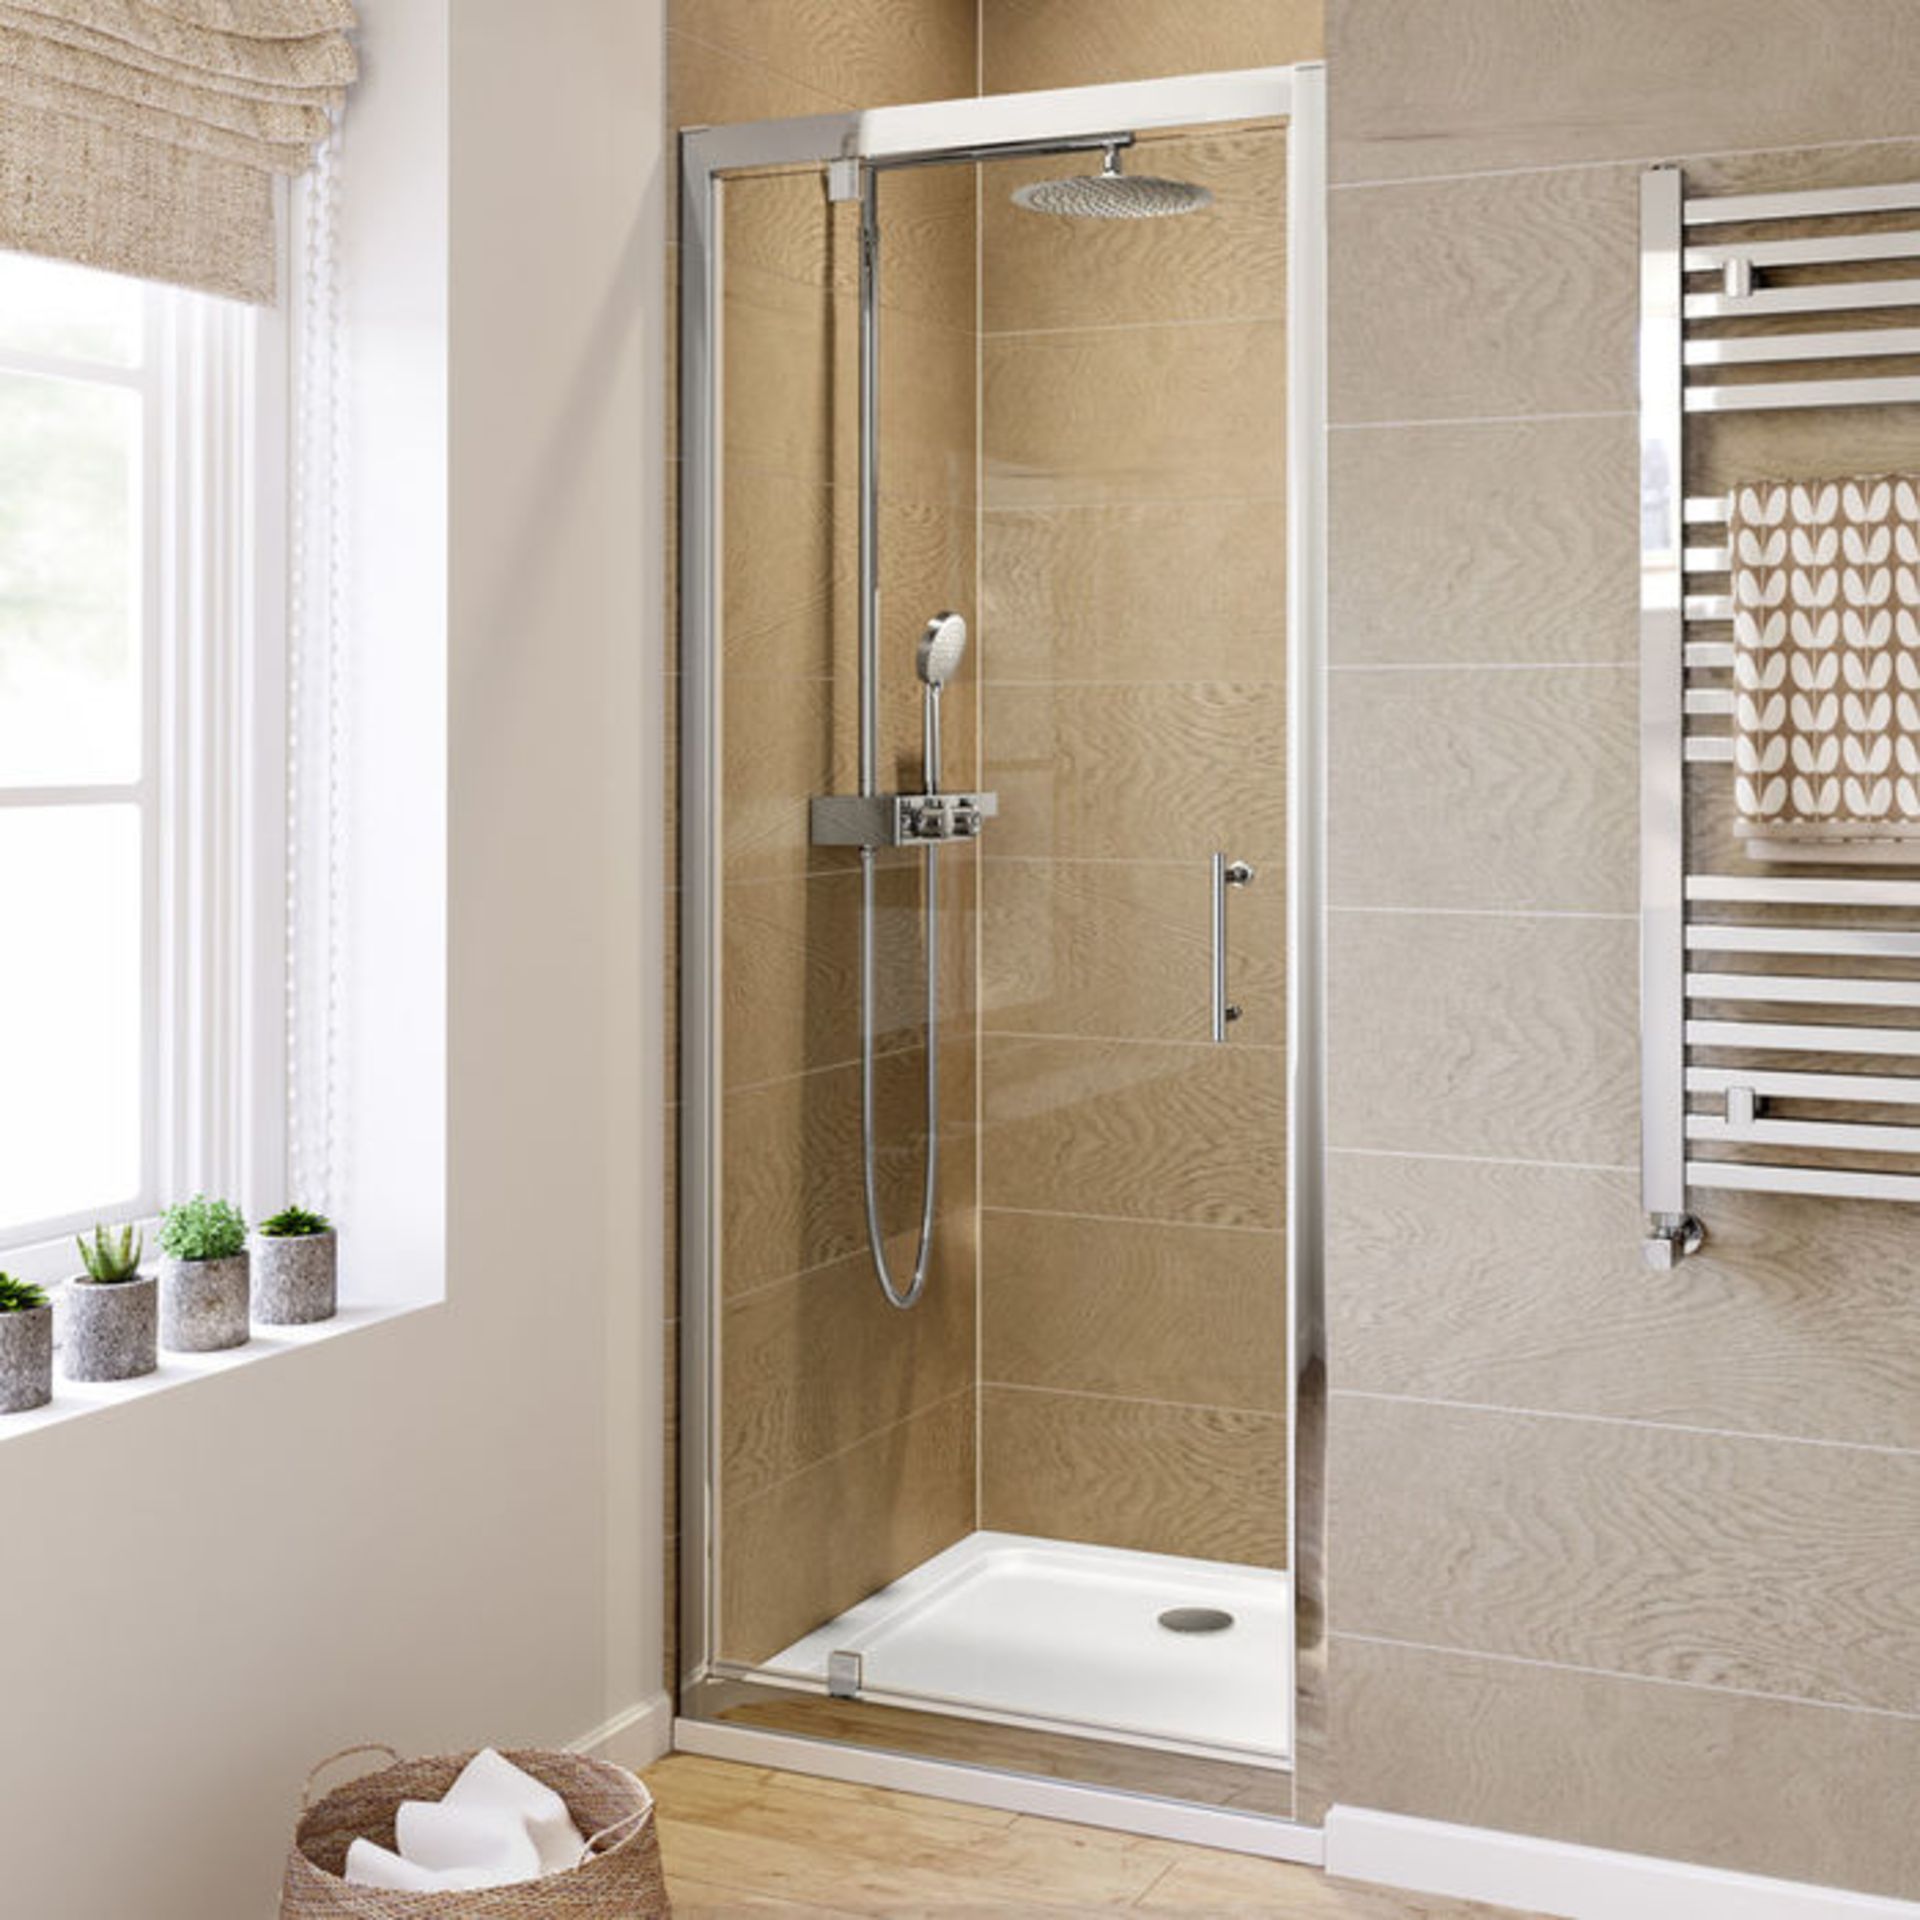 (CT170) 900mm - 6mm - Elements Pivot Shower Door. RRP £299.99. 6mm Safety Glass Fully waterproof - Image 2 of 3